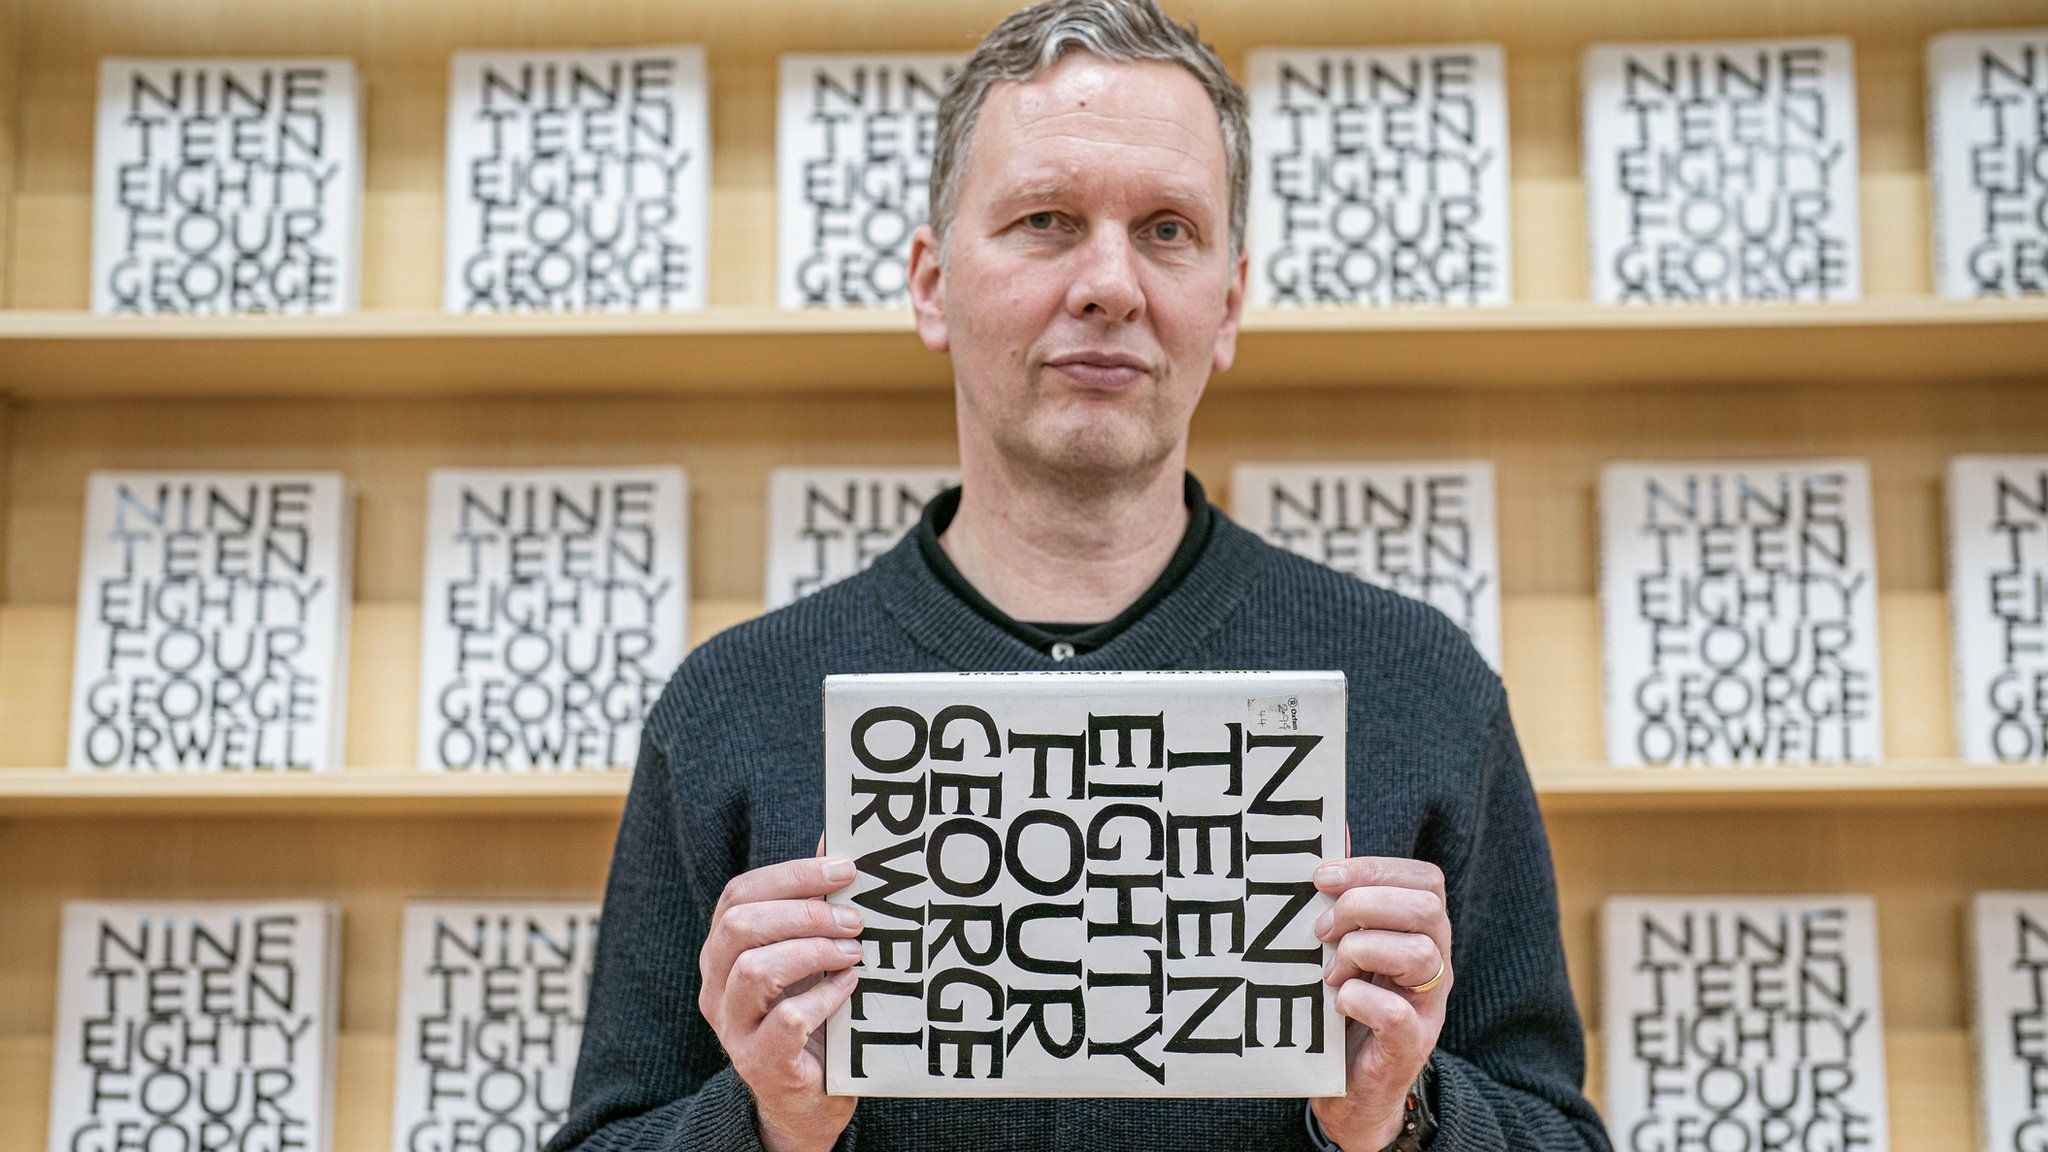 David Shrigley standing in front of a book shelf of his 1984 edition.